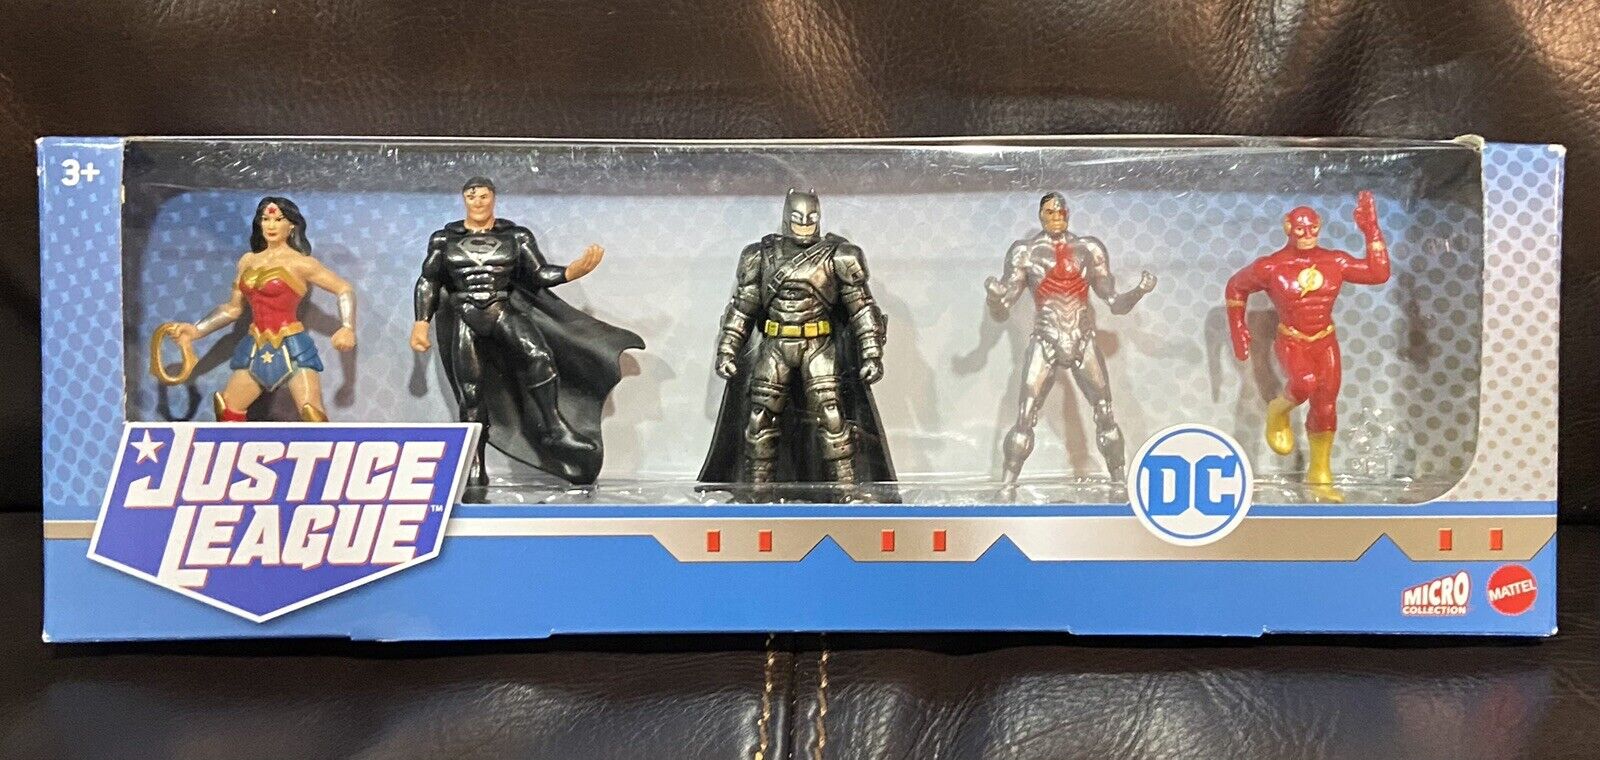 DC Justice League Micro Collectible 2" Figures - Set of 5